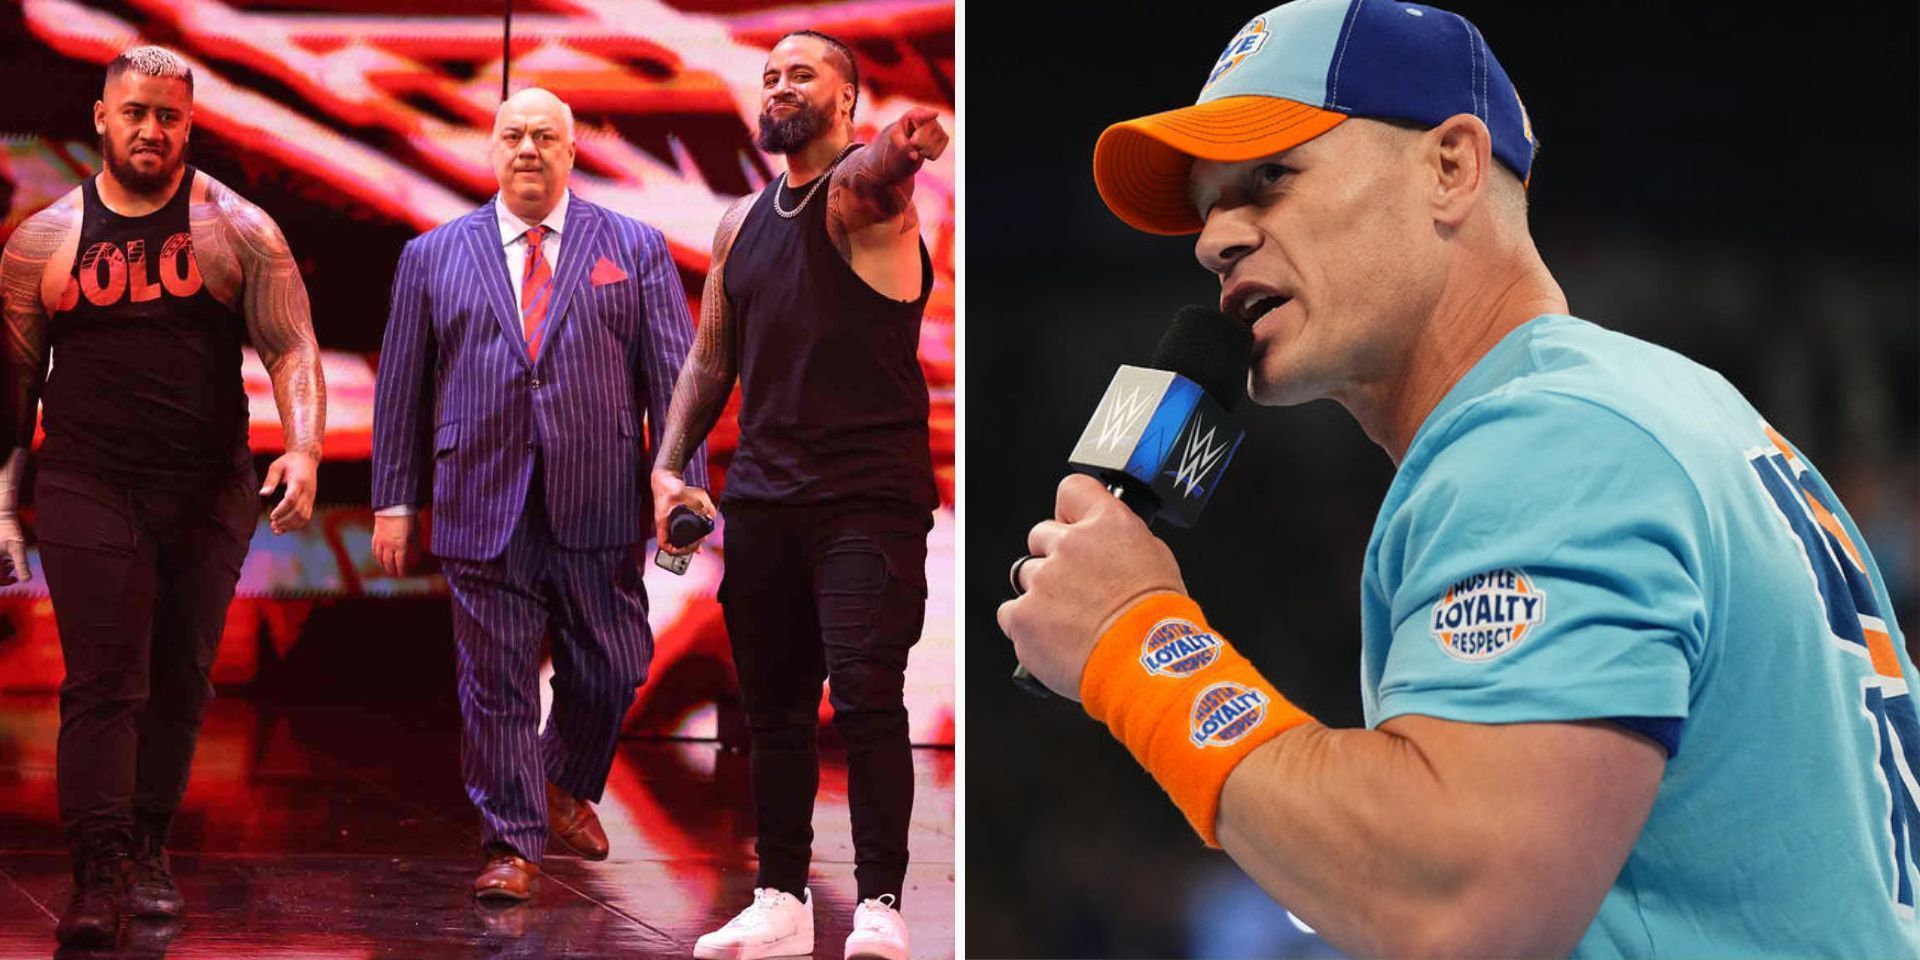 John Cena was involved in a brawl with Jimmy Uso and Solo Sikoa on SmackDown